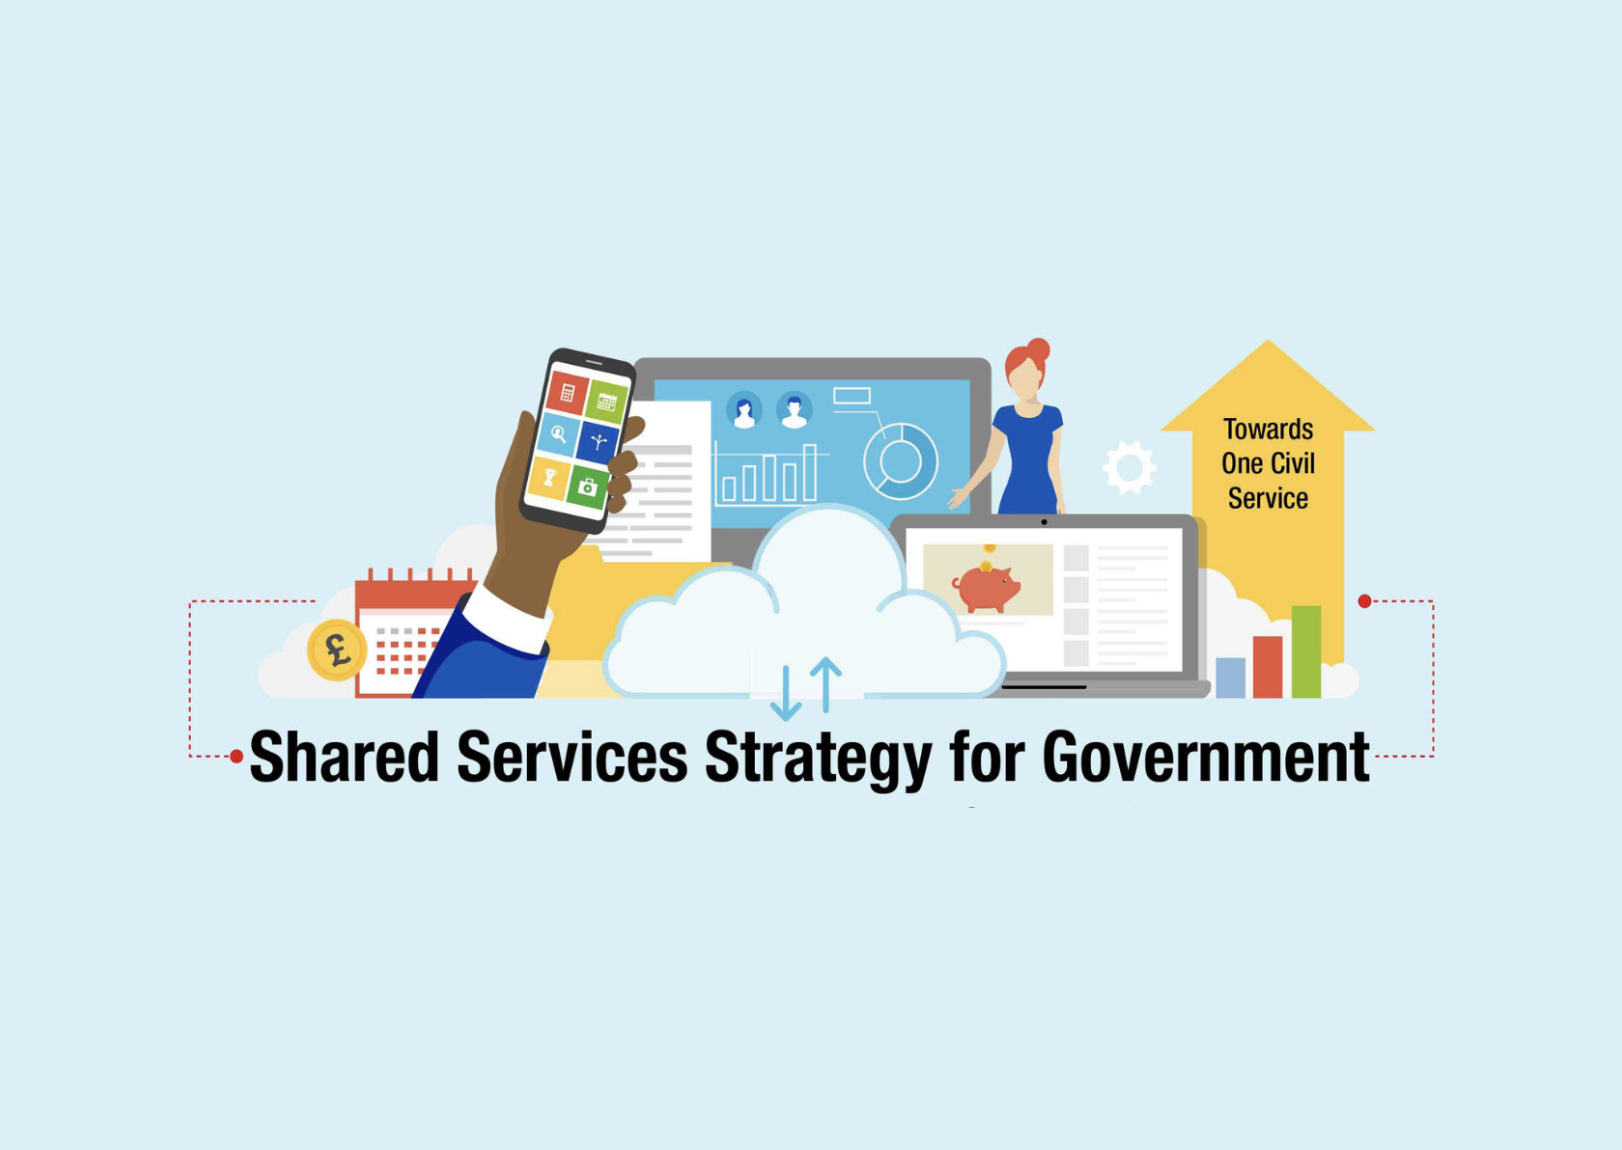 Shared services strategy for government decorative graphic